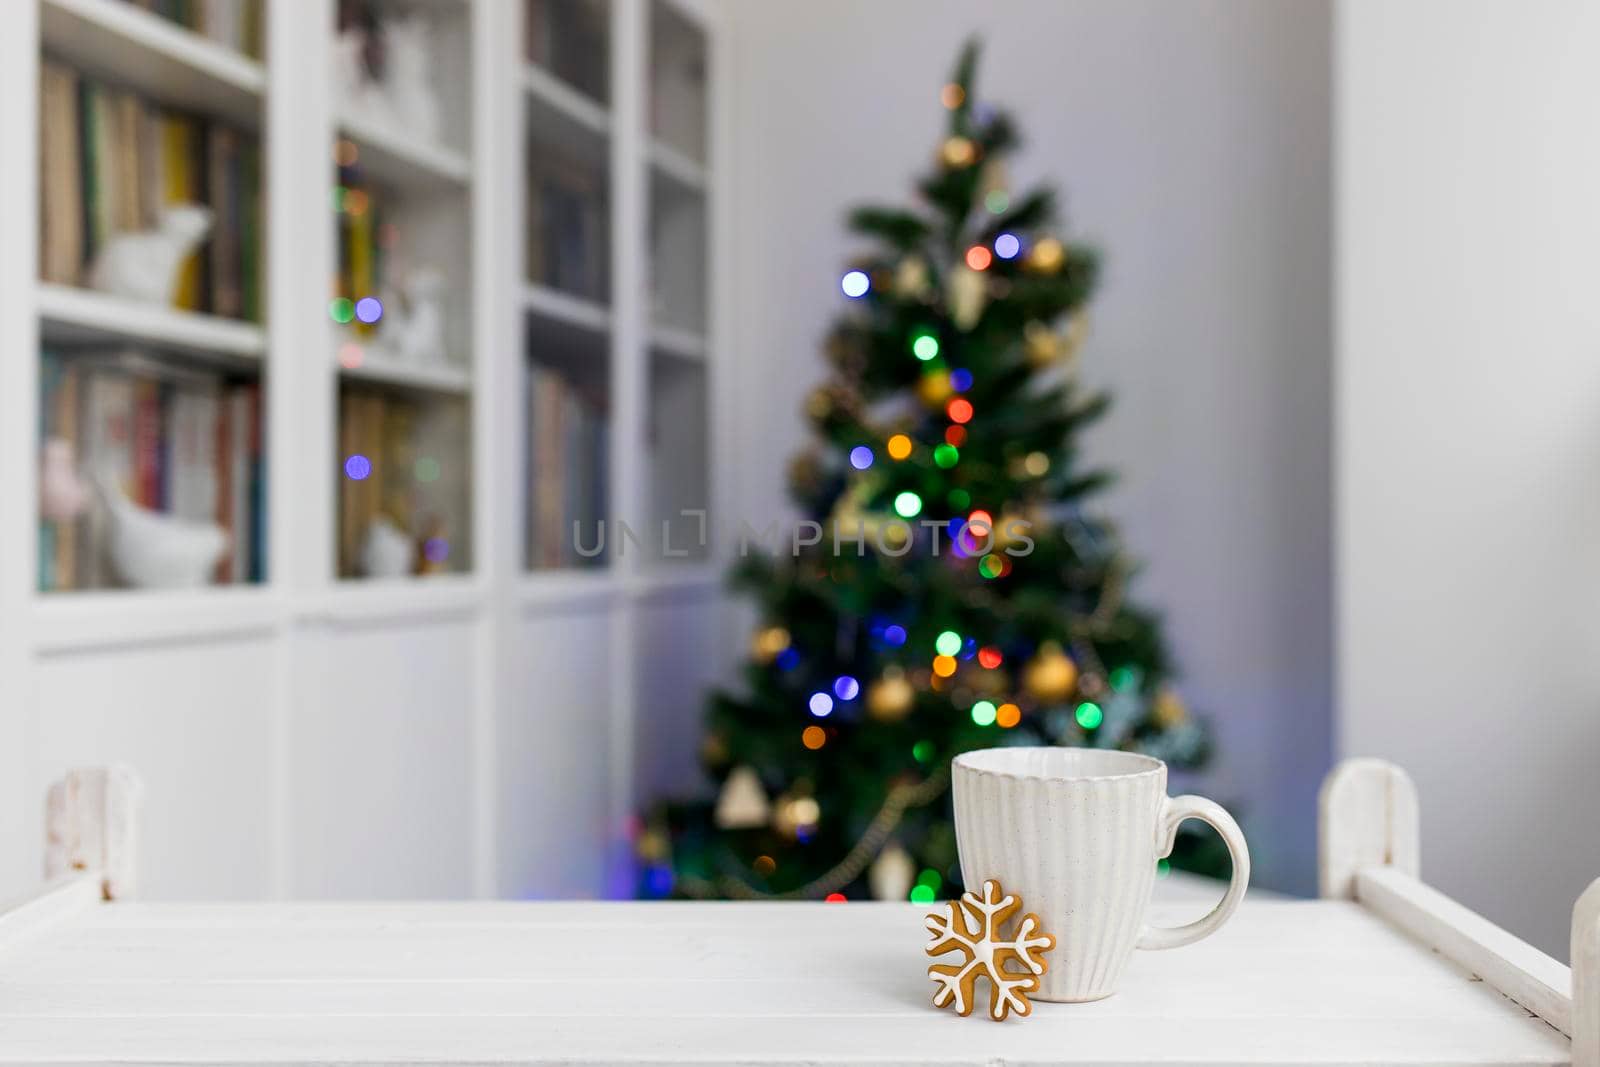 White cup with tea and gingerbread cookies in the form of a snowflake on the table against the background of an unsharp Christmas tree with lights in the interior